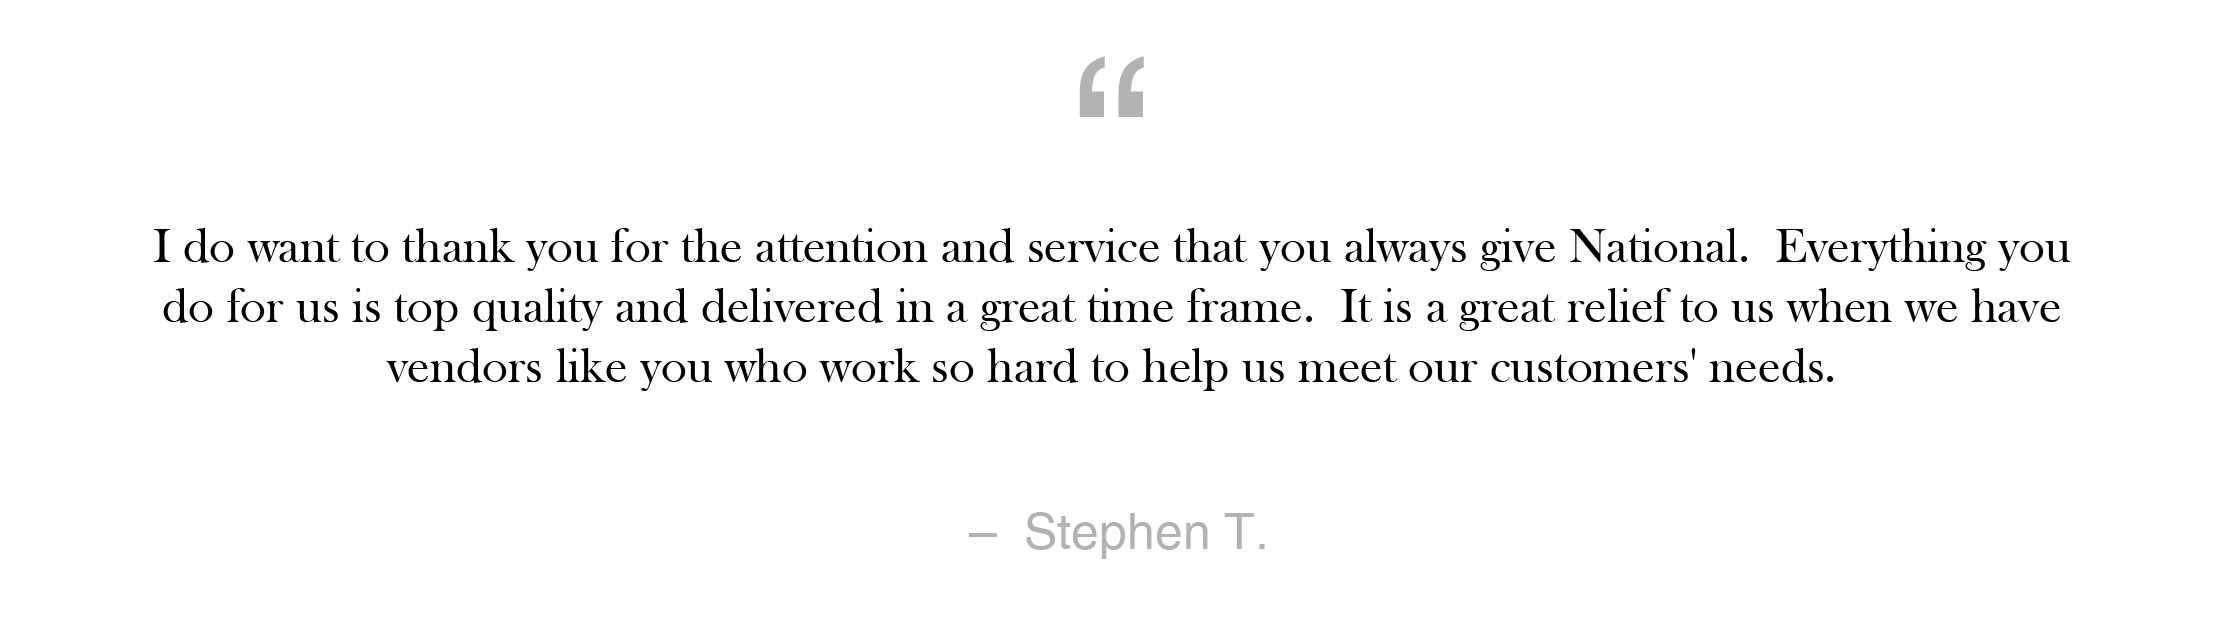 Quote#11_StephenT-01.png